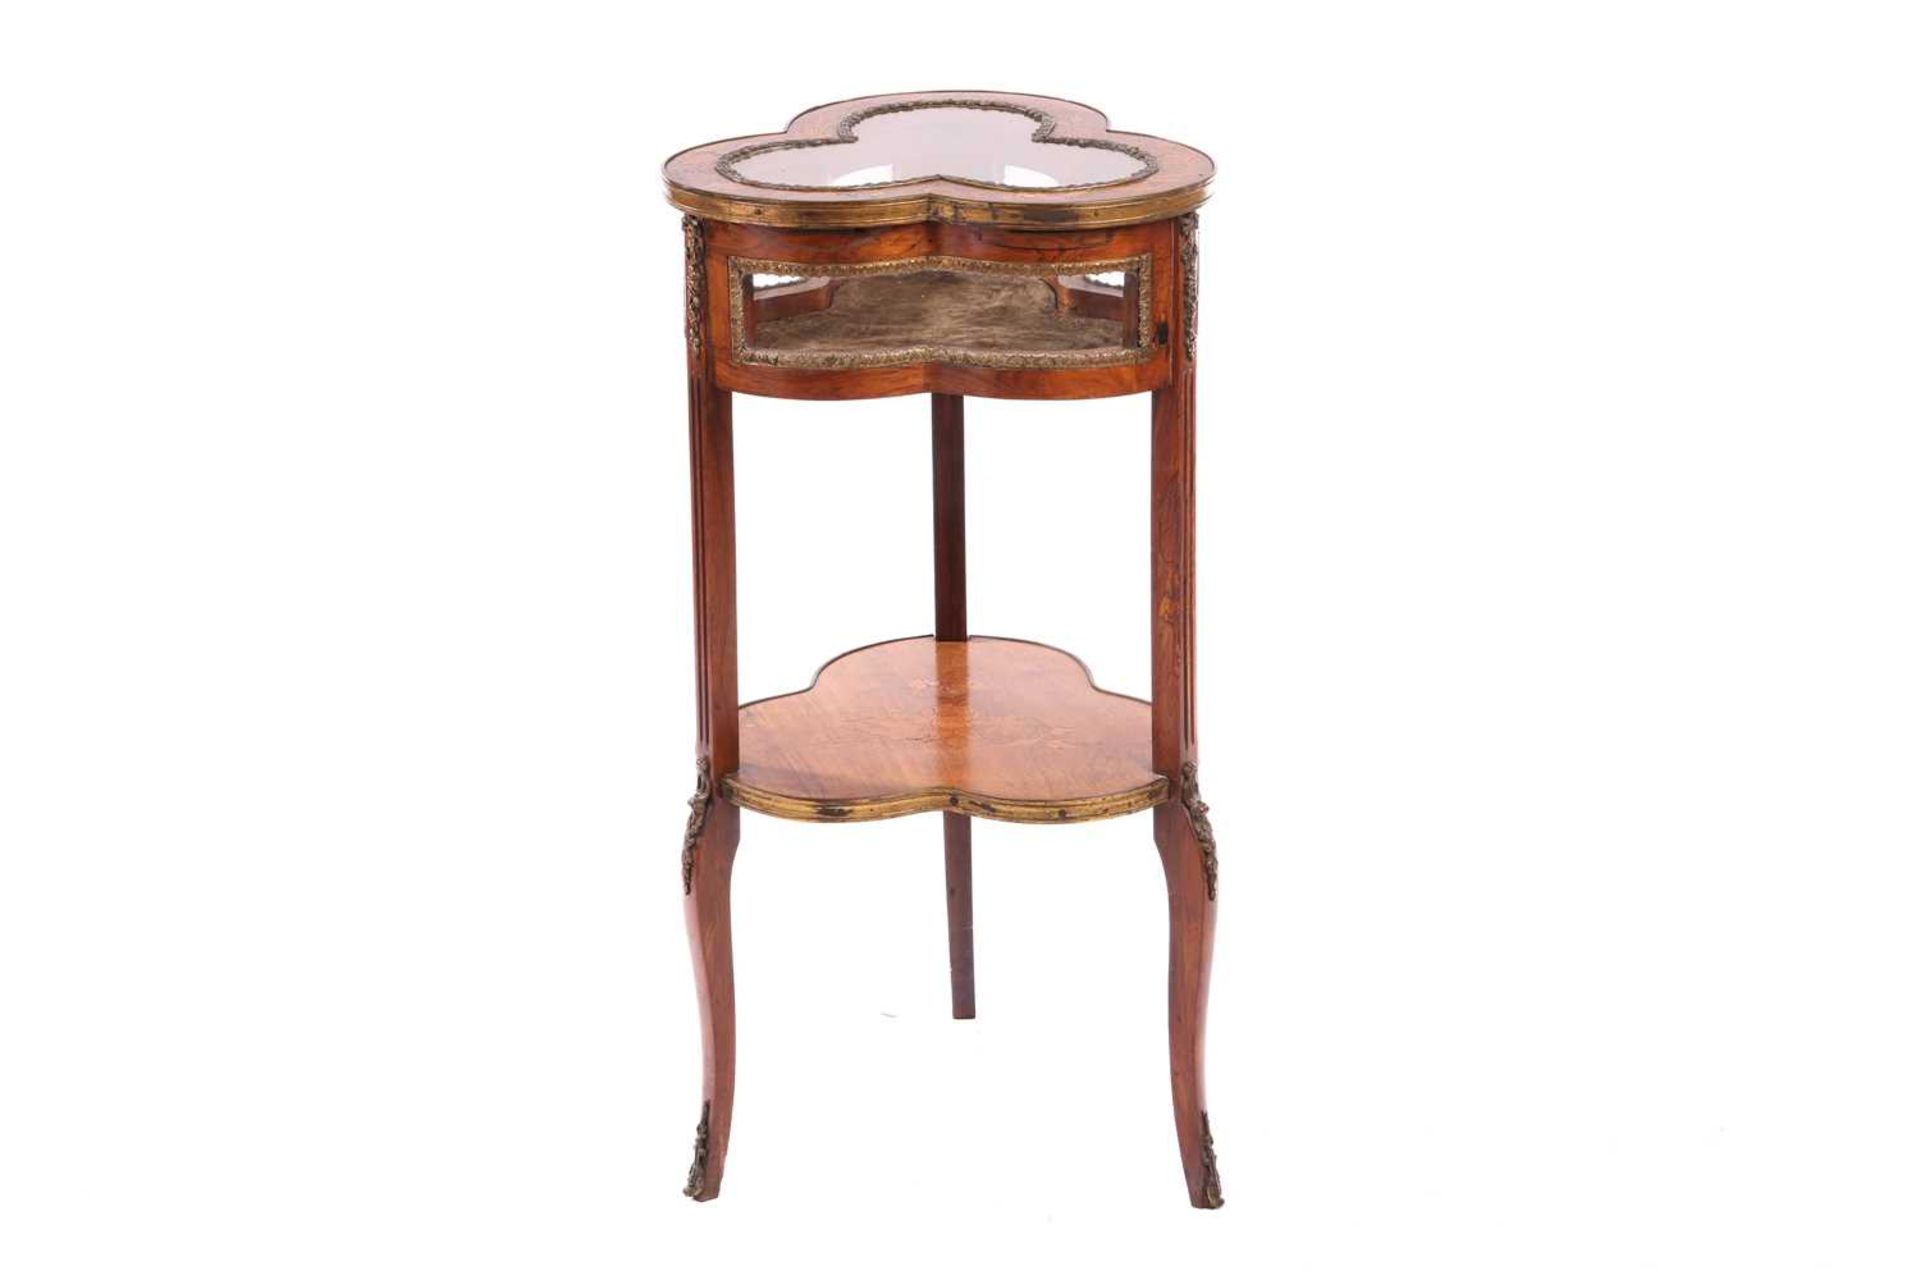 A Napoleon III walnut and marquetry "Club" shaped bijouterie table, with gilt metal mounts throughou - Image 6 of 6